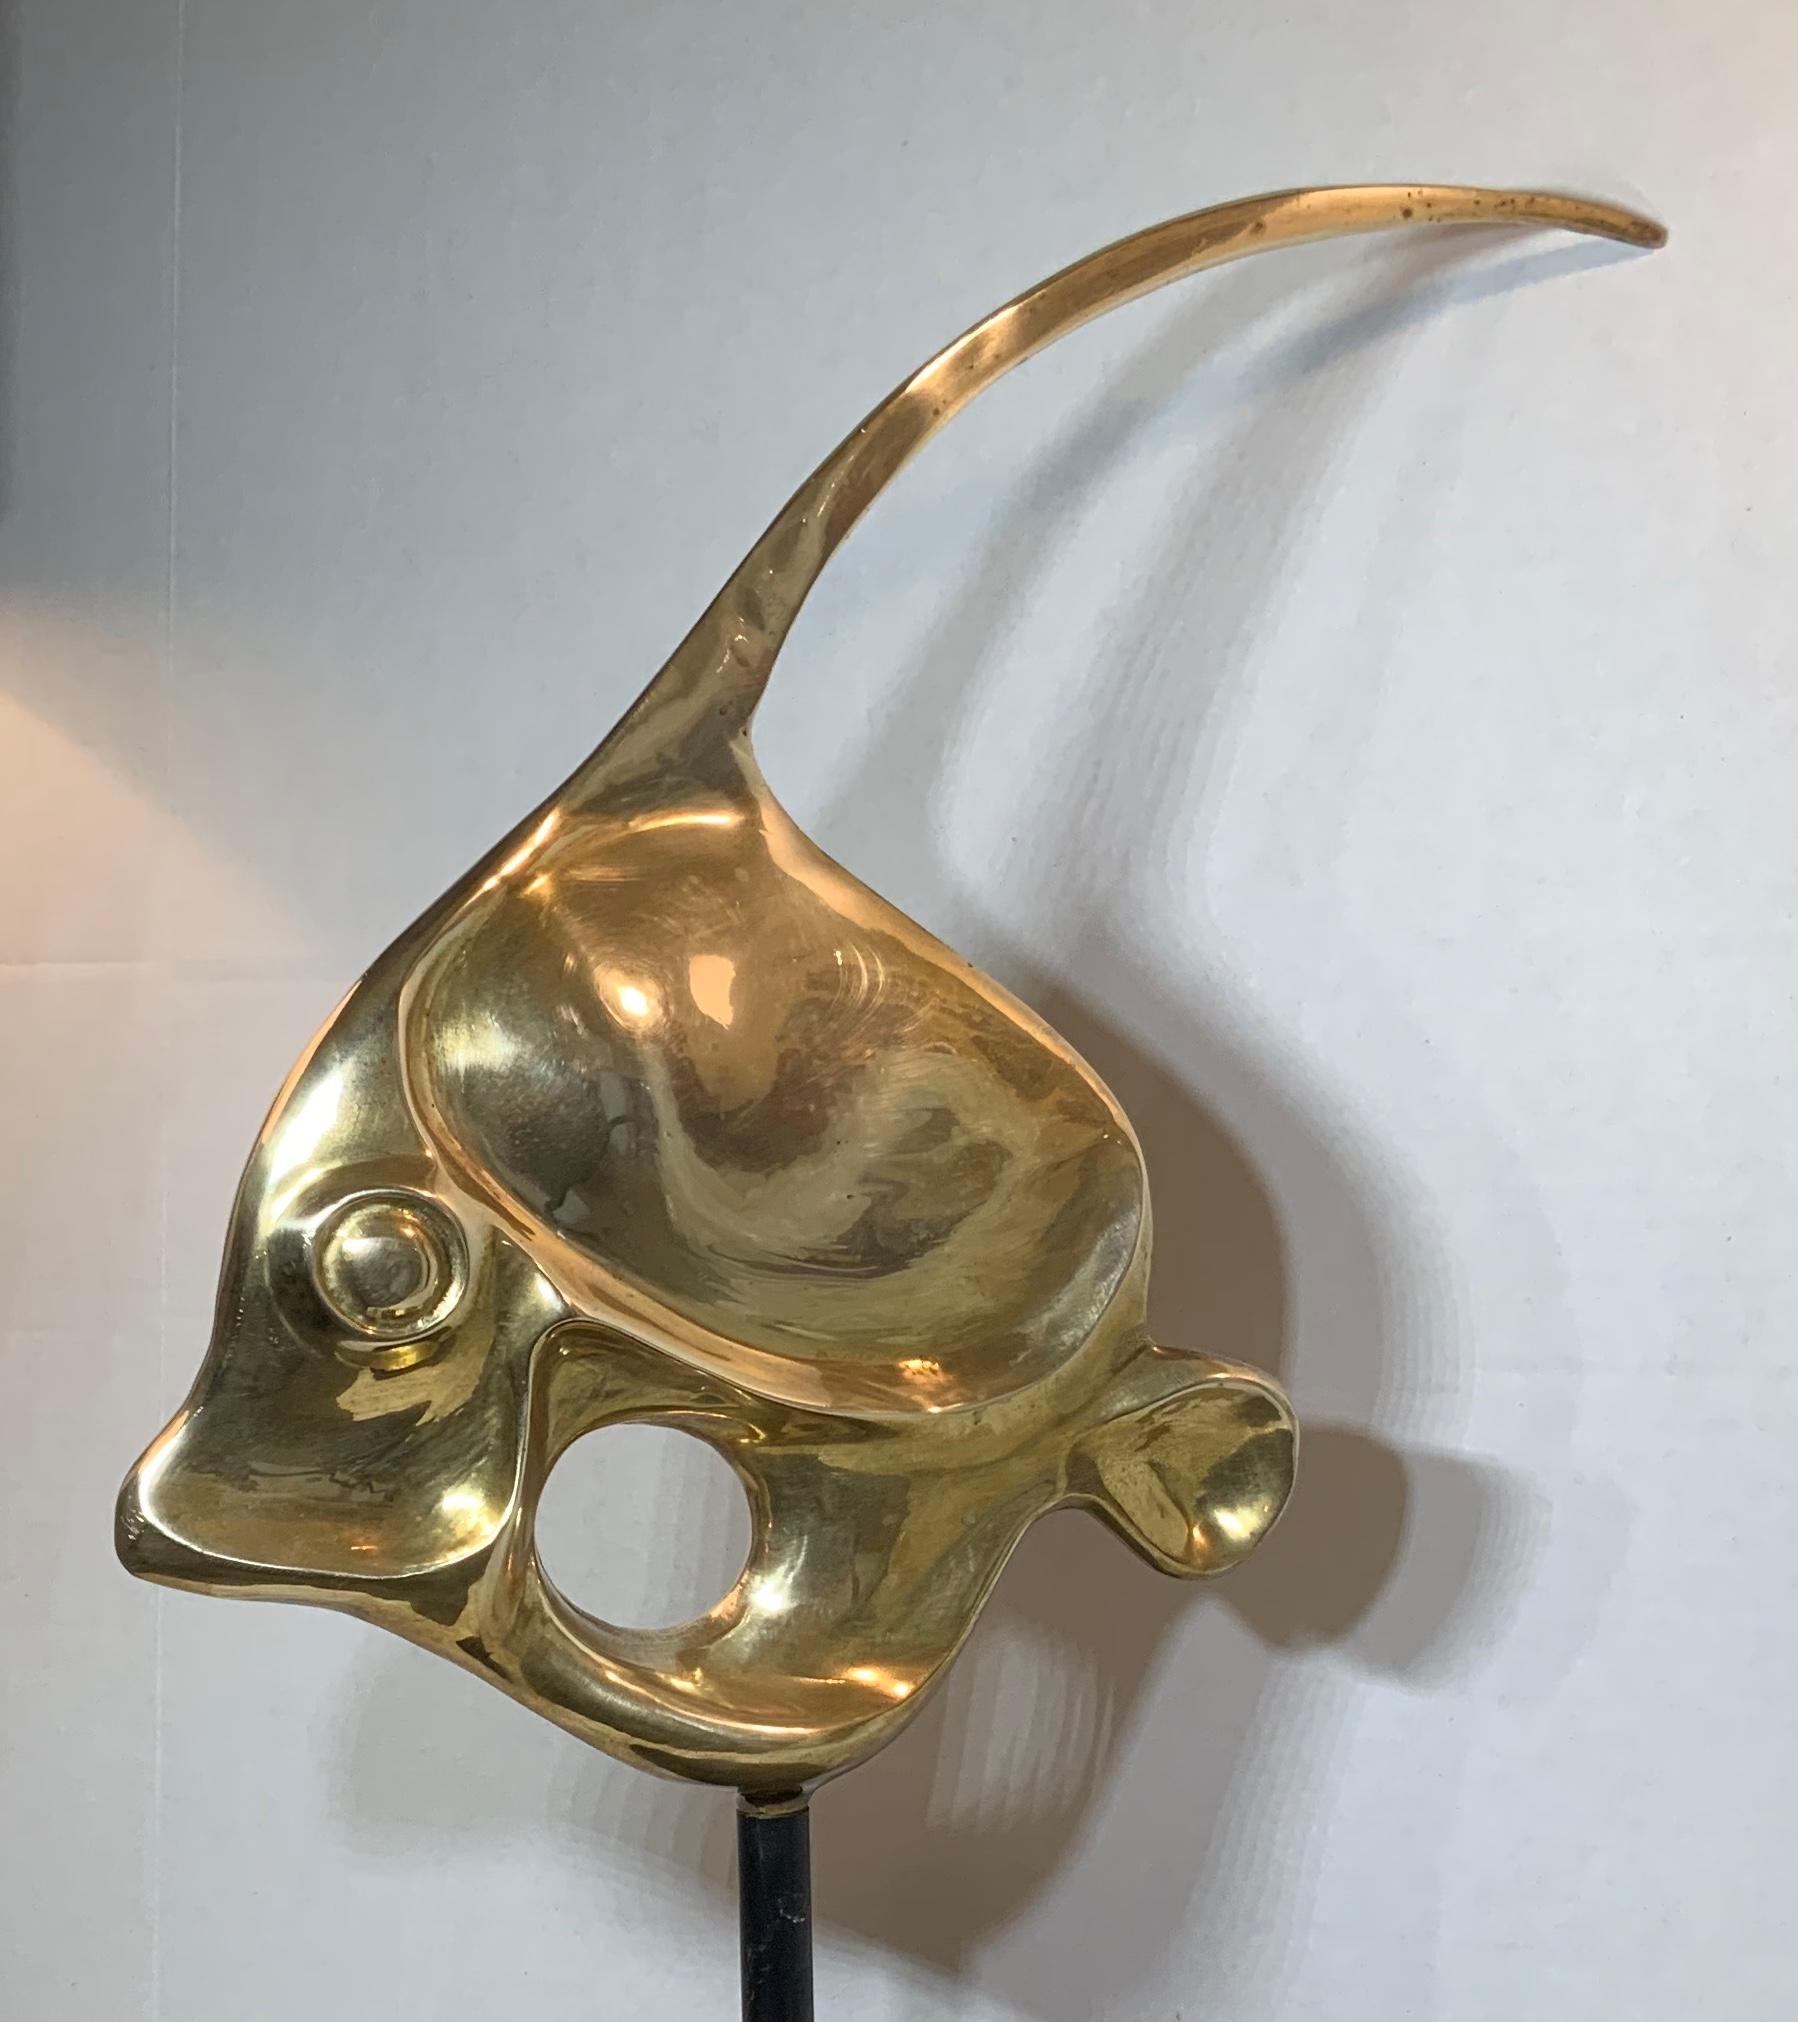 Elegant sculpture of fish made of solid brass, professionally mounted on custom made wood base. Beautiful decorative object of art.